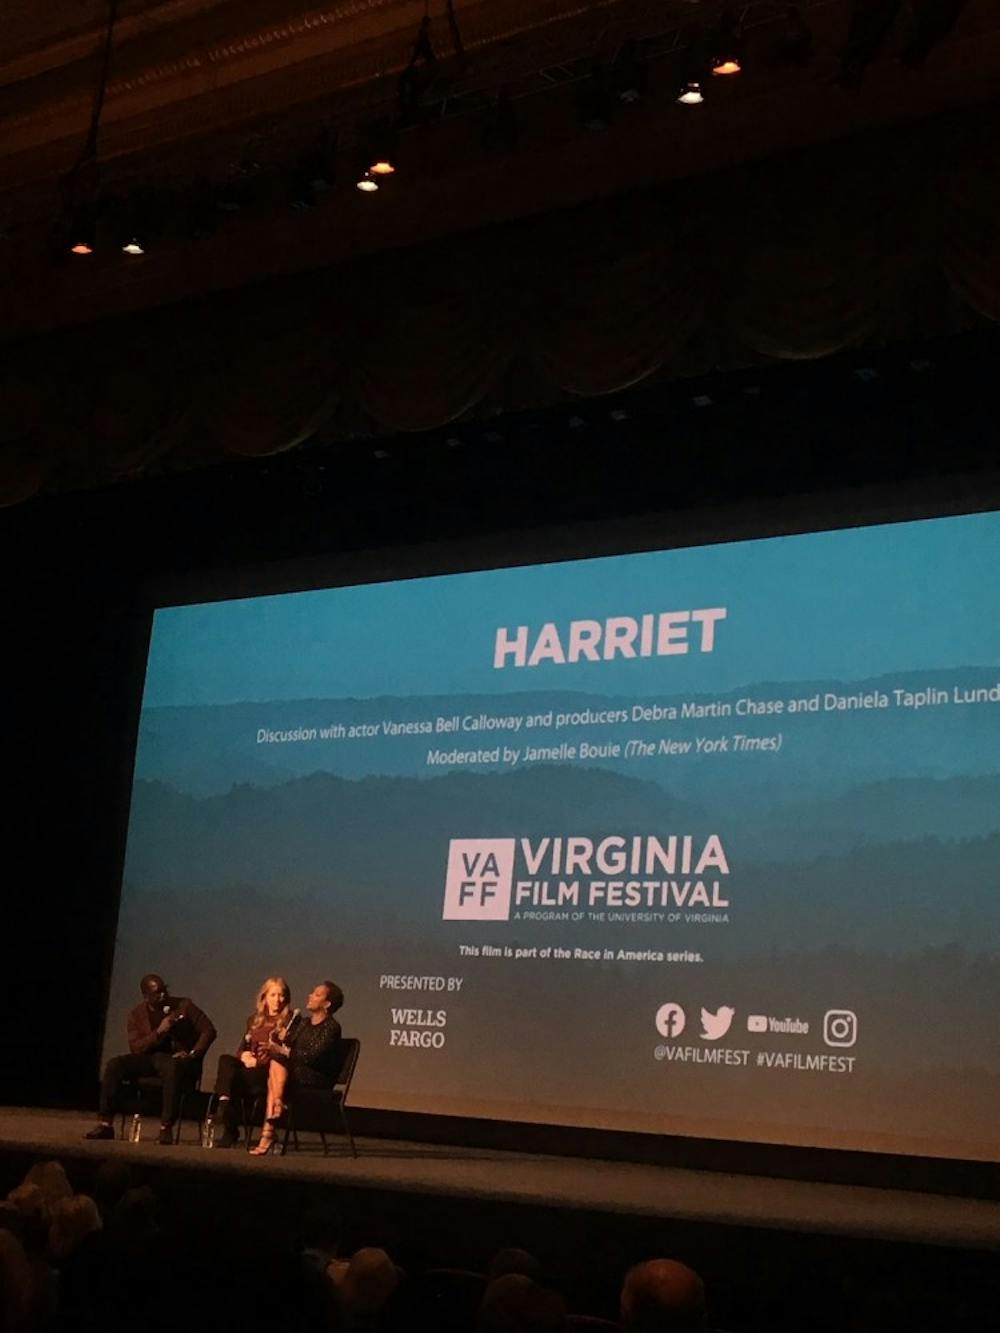 <p>The screening of "Harriet" at the Virginia Film Festival was followed by a discussion moderated by The New York Times writer Jamelle Bouie.</p>